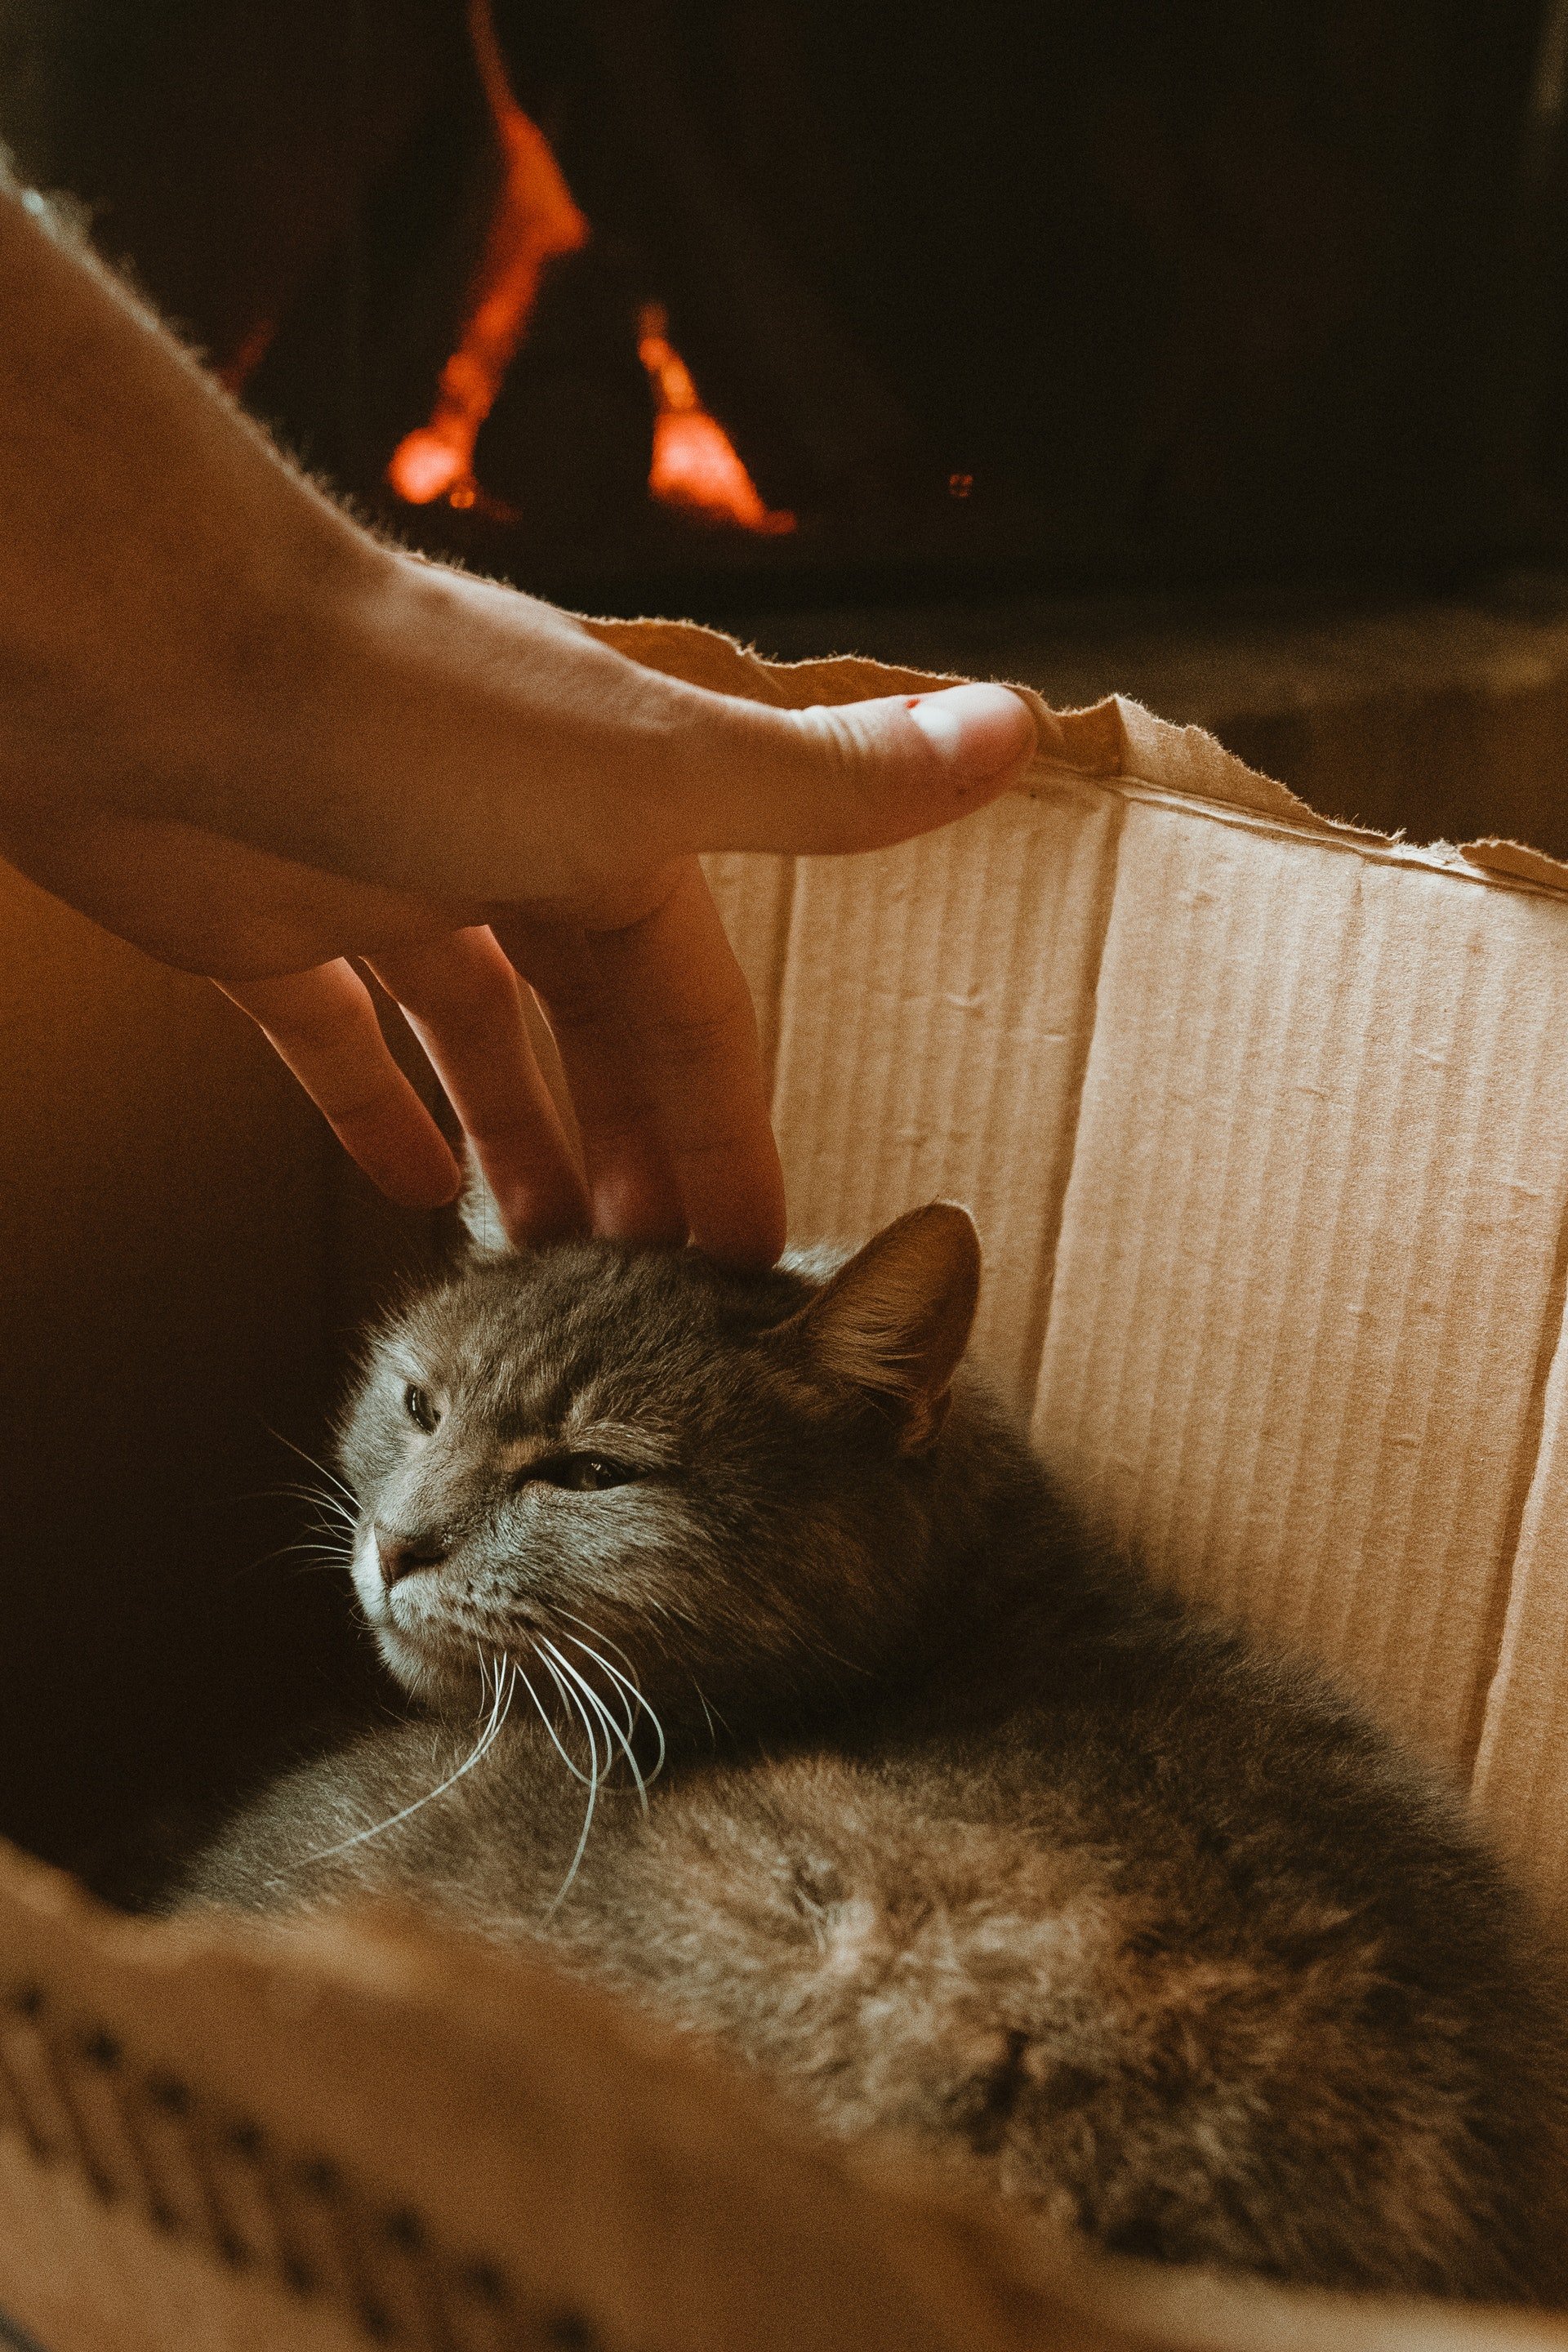 Person's hand petting a cat lying in a box | Photo: Pexels/Agustín Garagorry